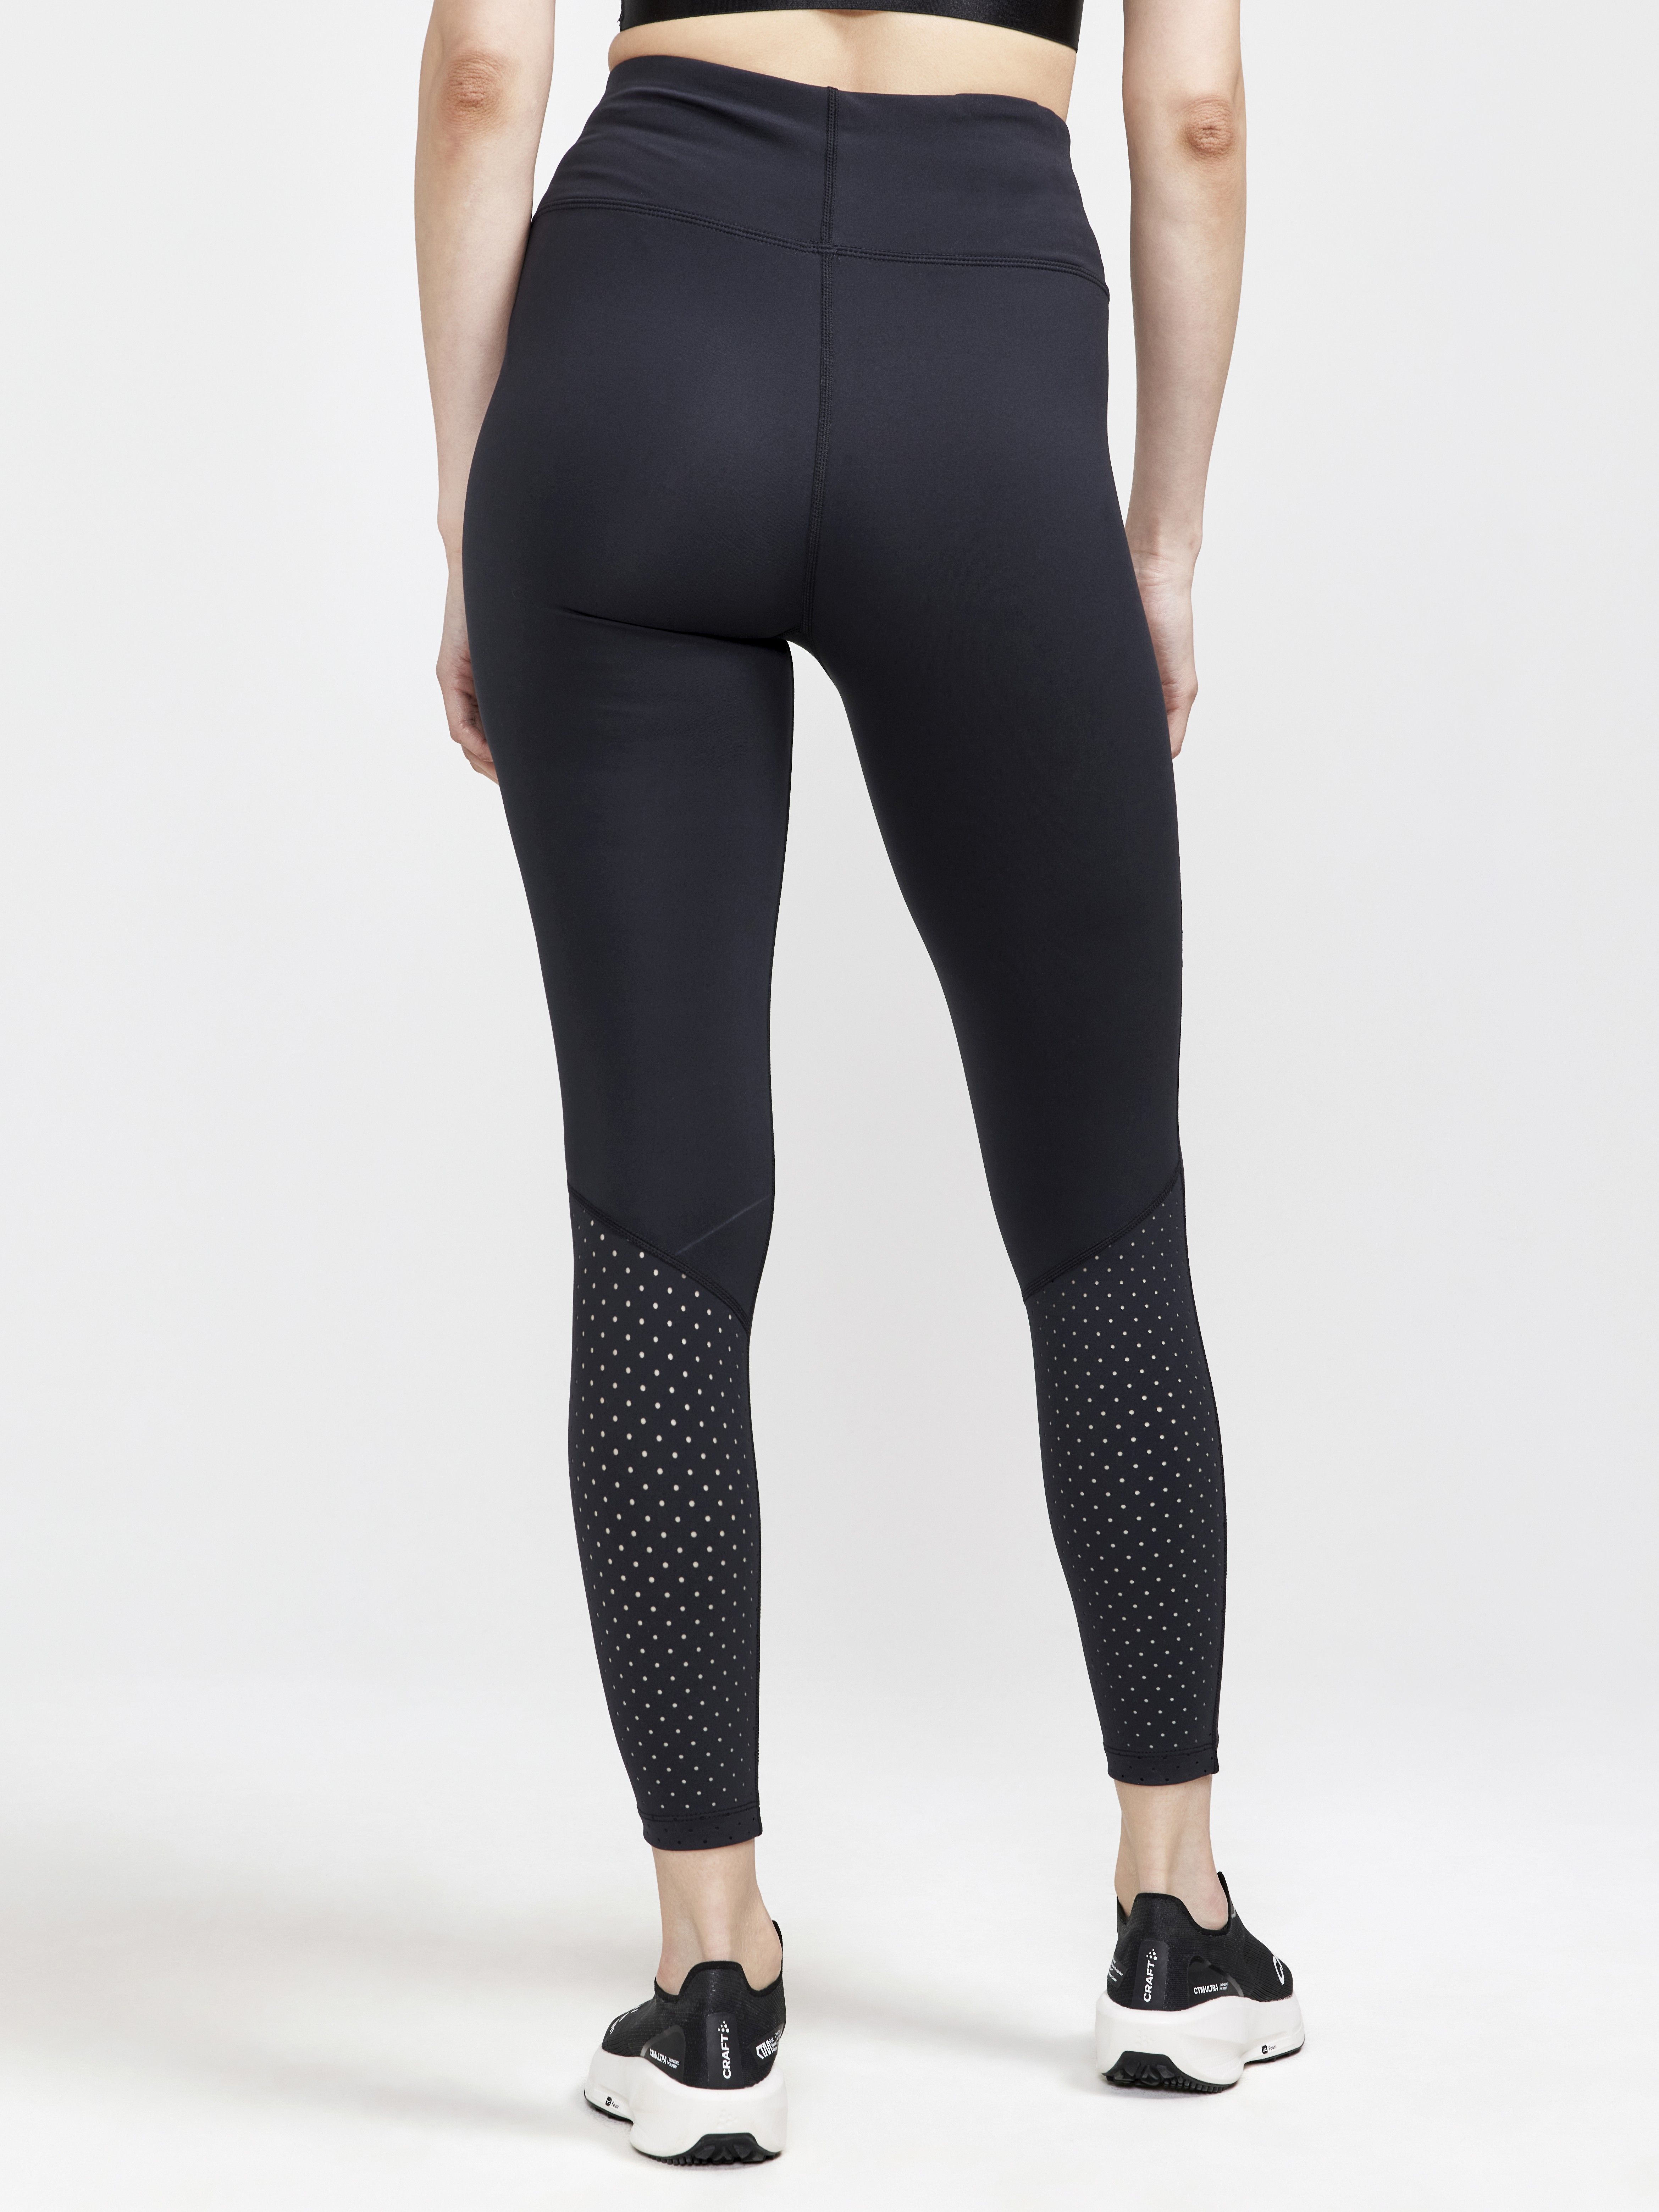 Women's Adv Charge Perforated Tights Black, Buy Women's Adv Charge Perforated  Tights Black here